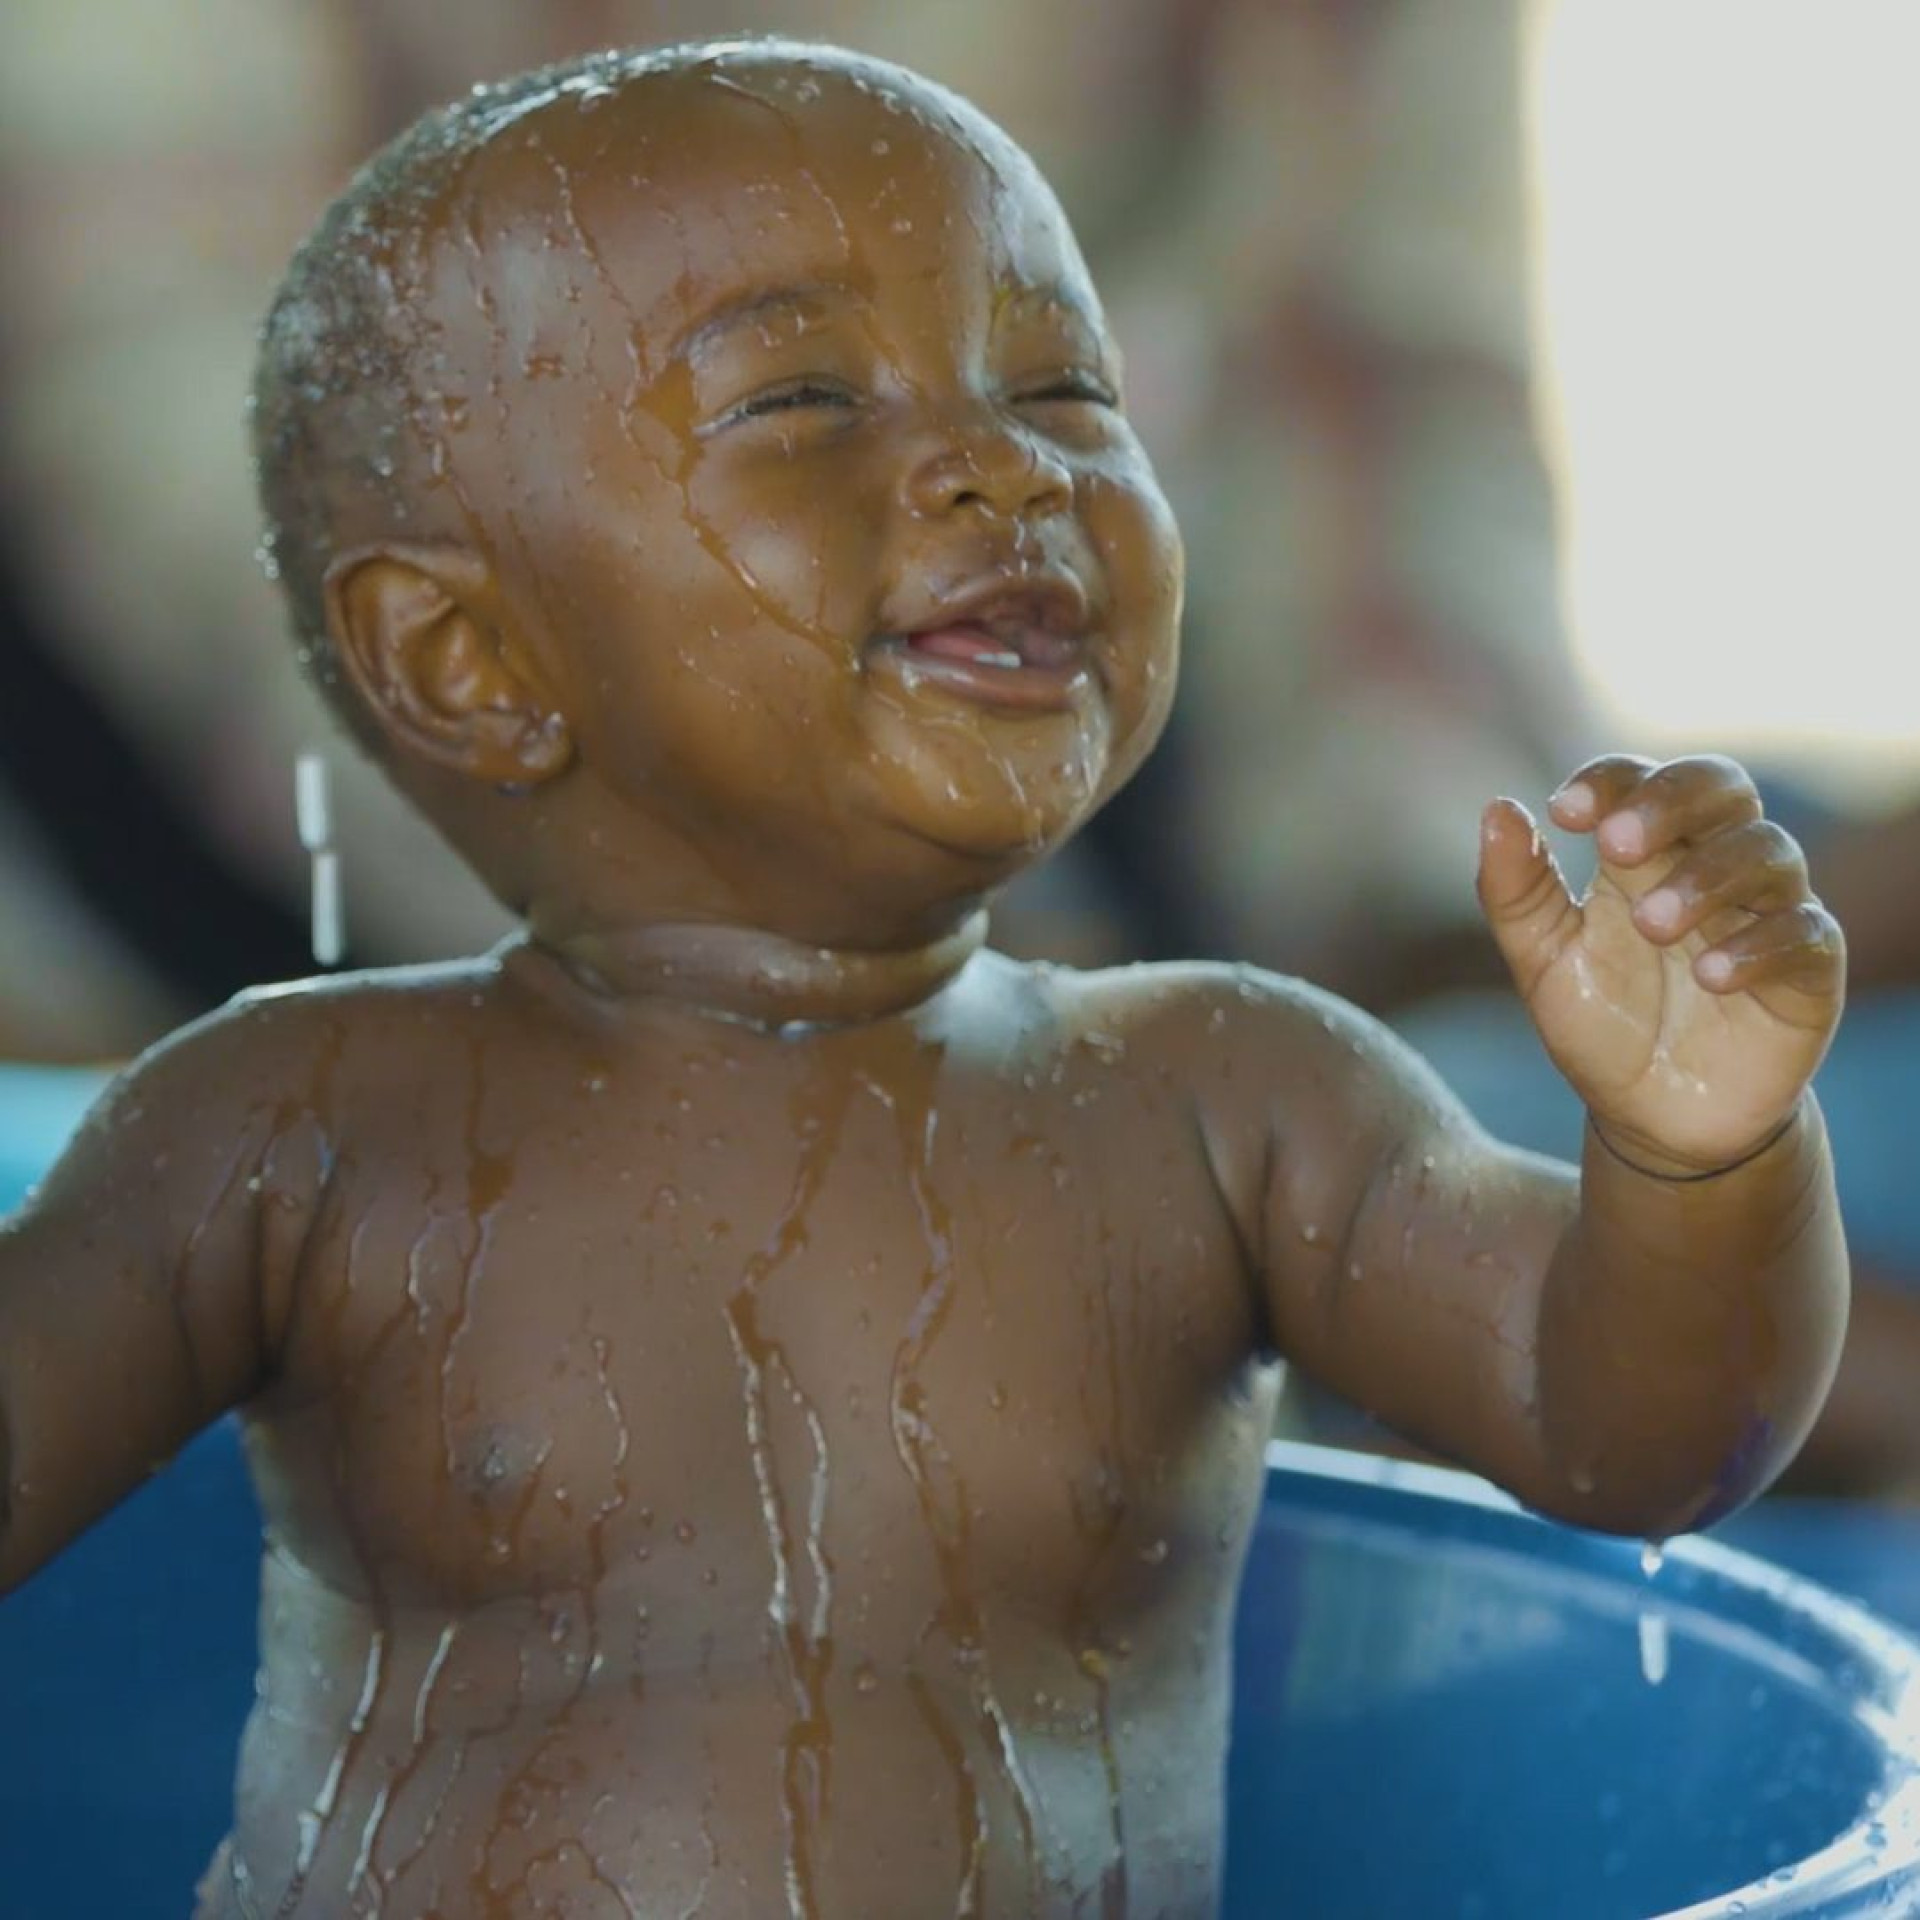 Still image of baby from ECD film series produced by DMI